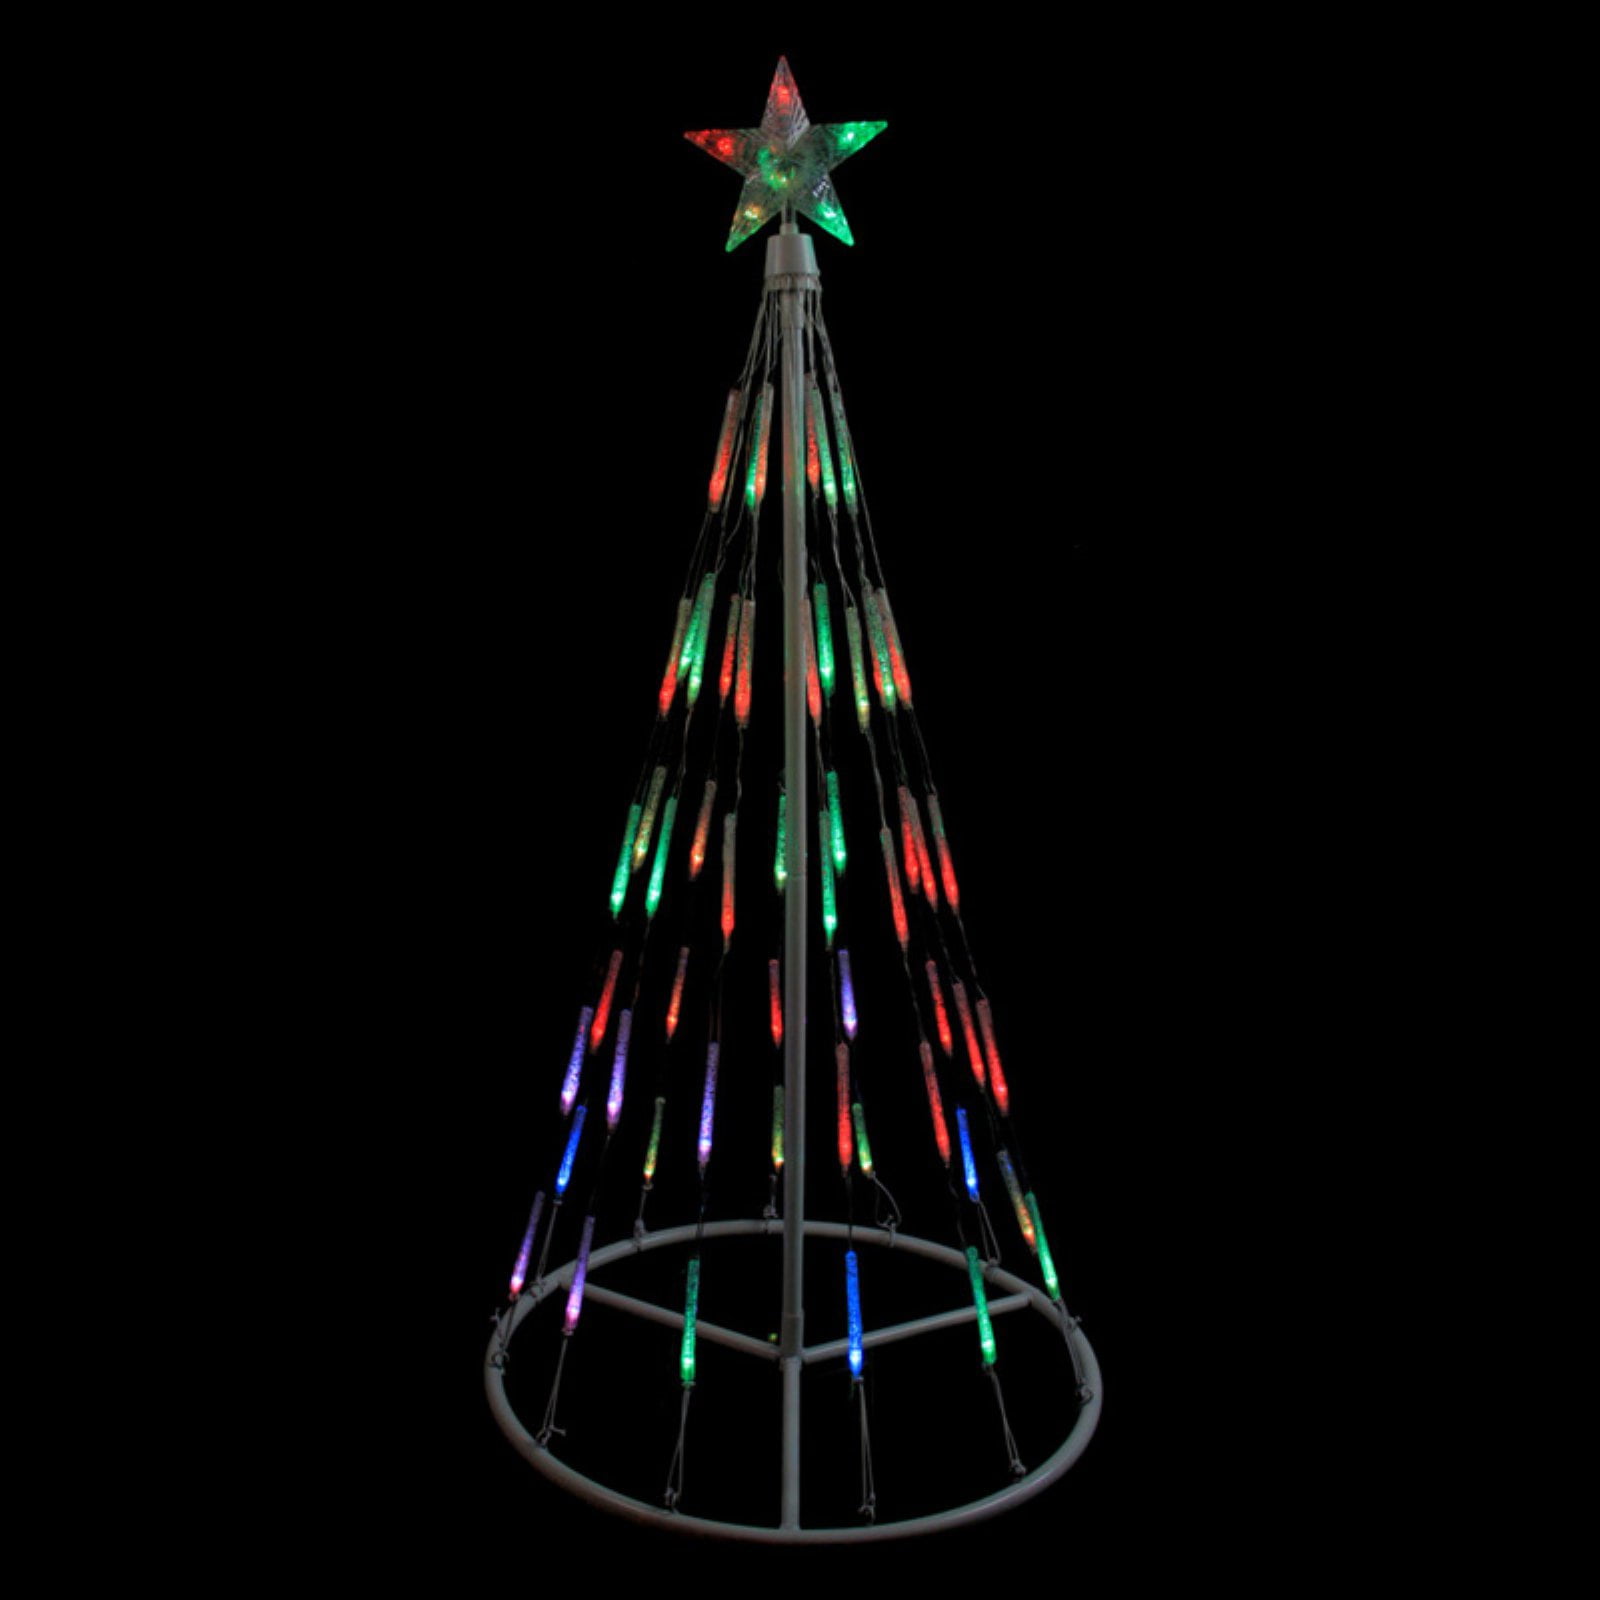 Northlight Single Tier Bubble Show Cone Lighted Christmas Tree Yard ...